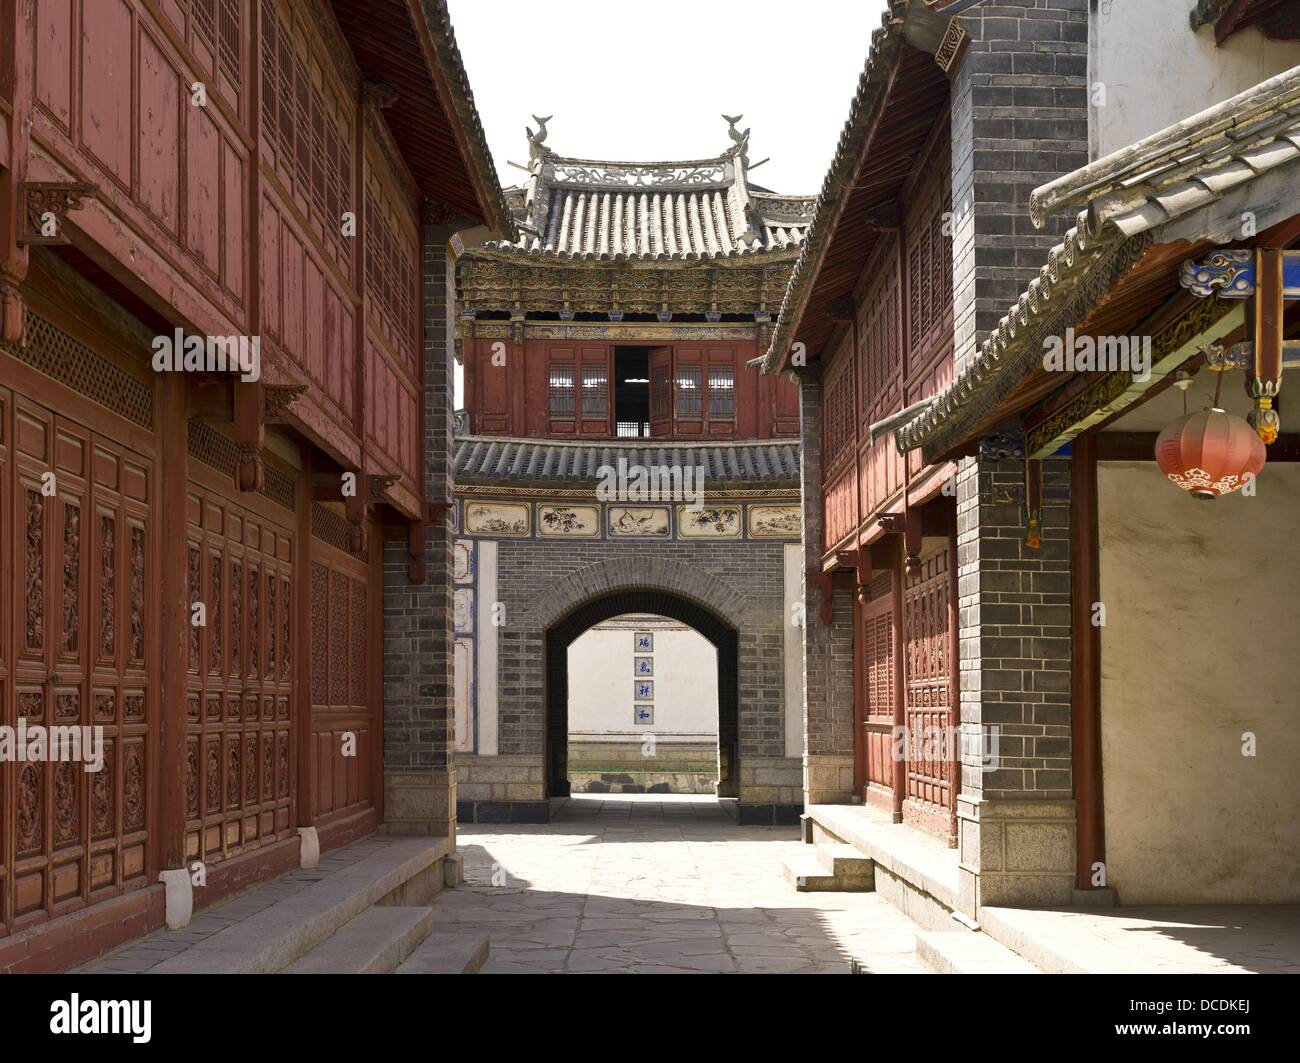 The Building Gate is delicate and profound  It has the smack of a palace or a pavilion in Central China with double eaves and Stock Photo